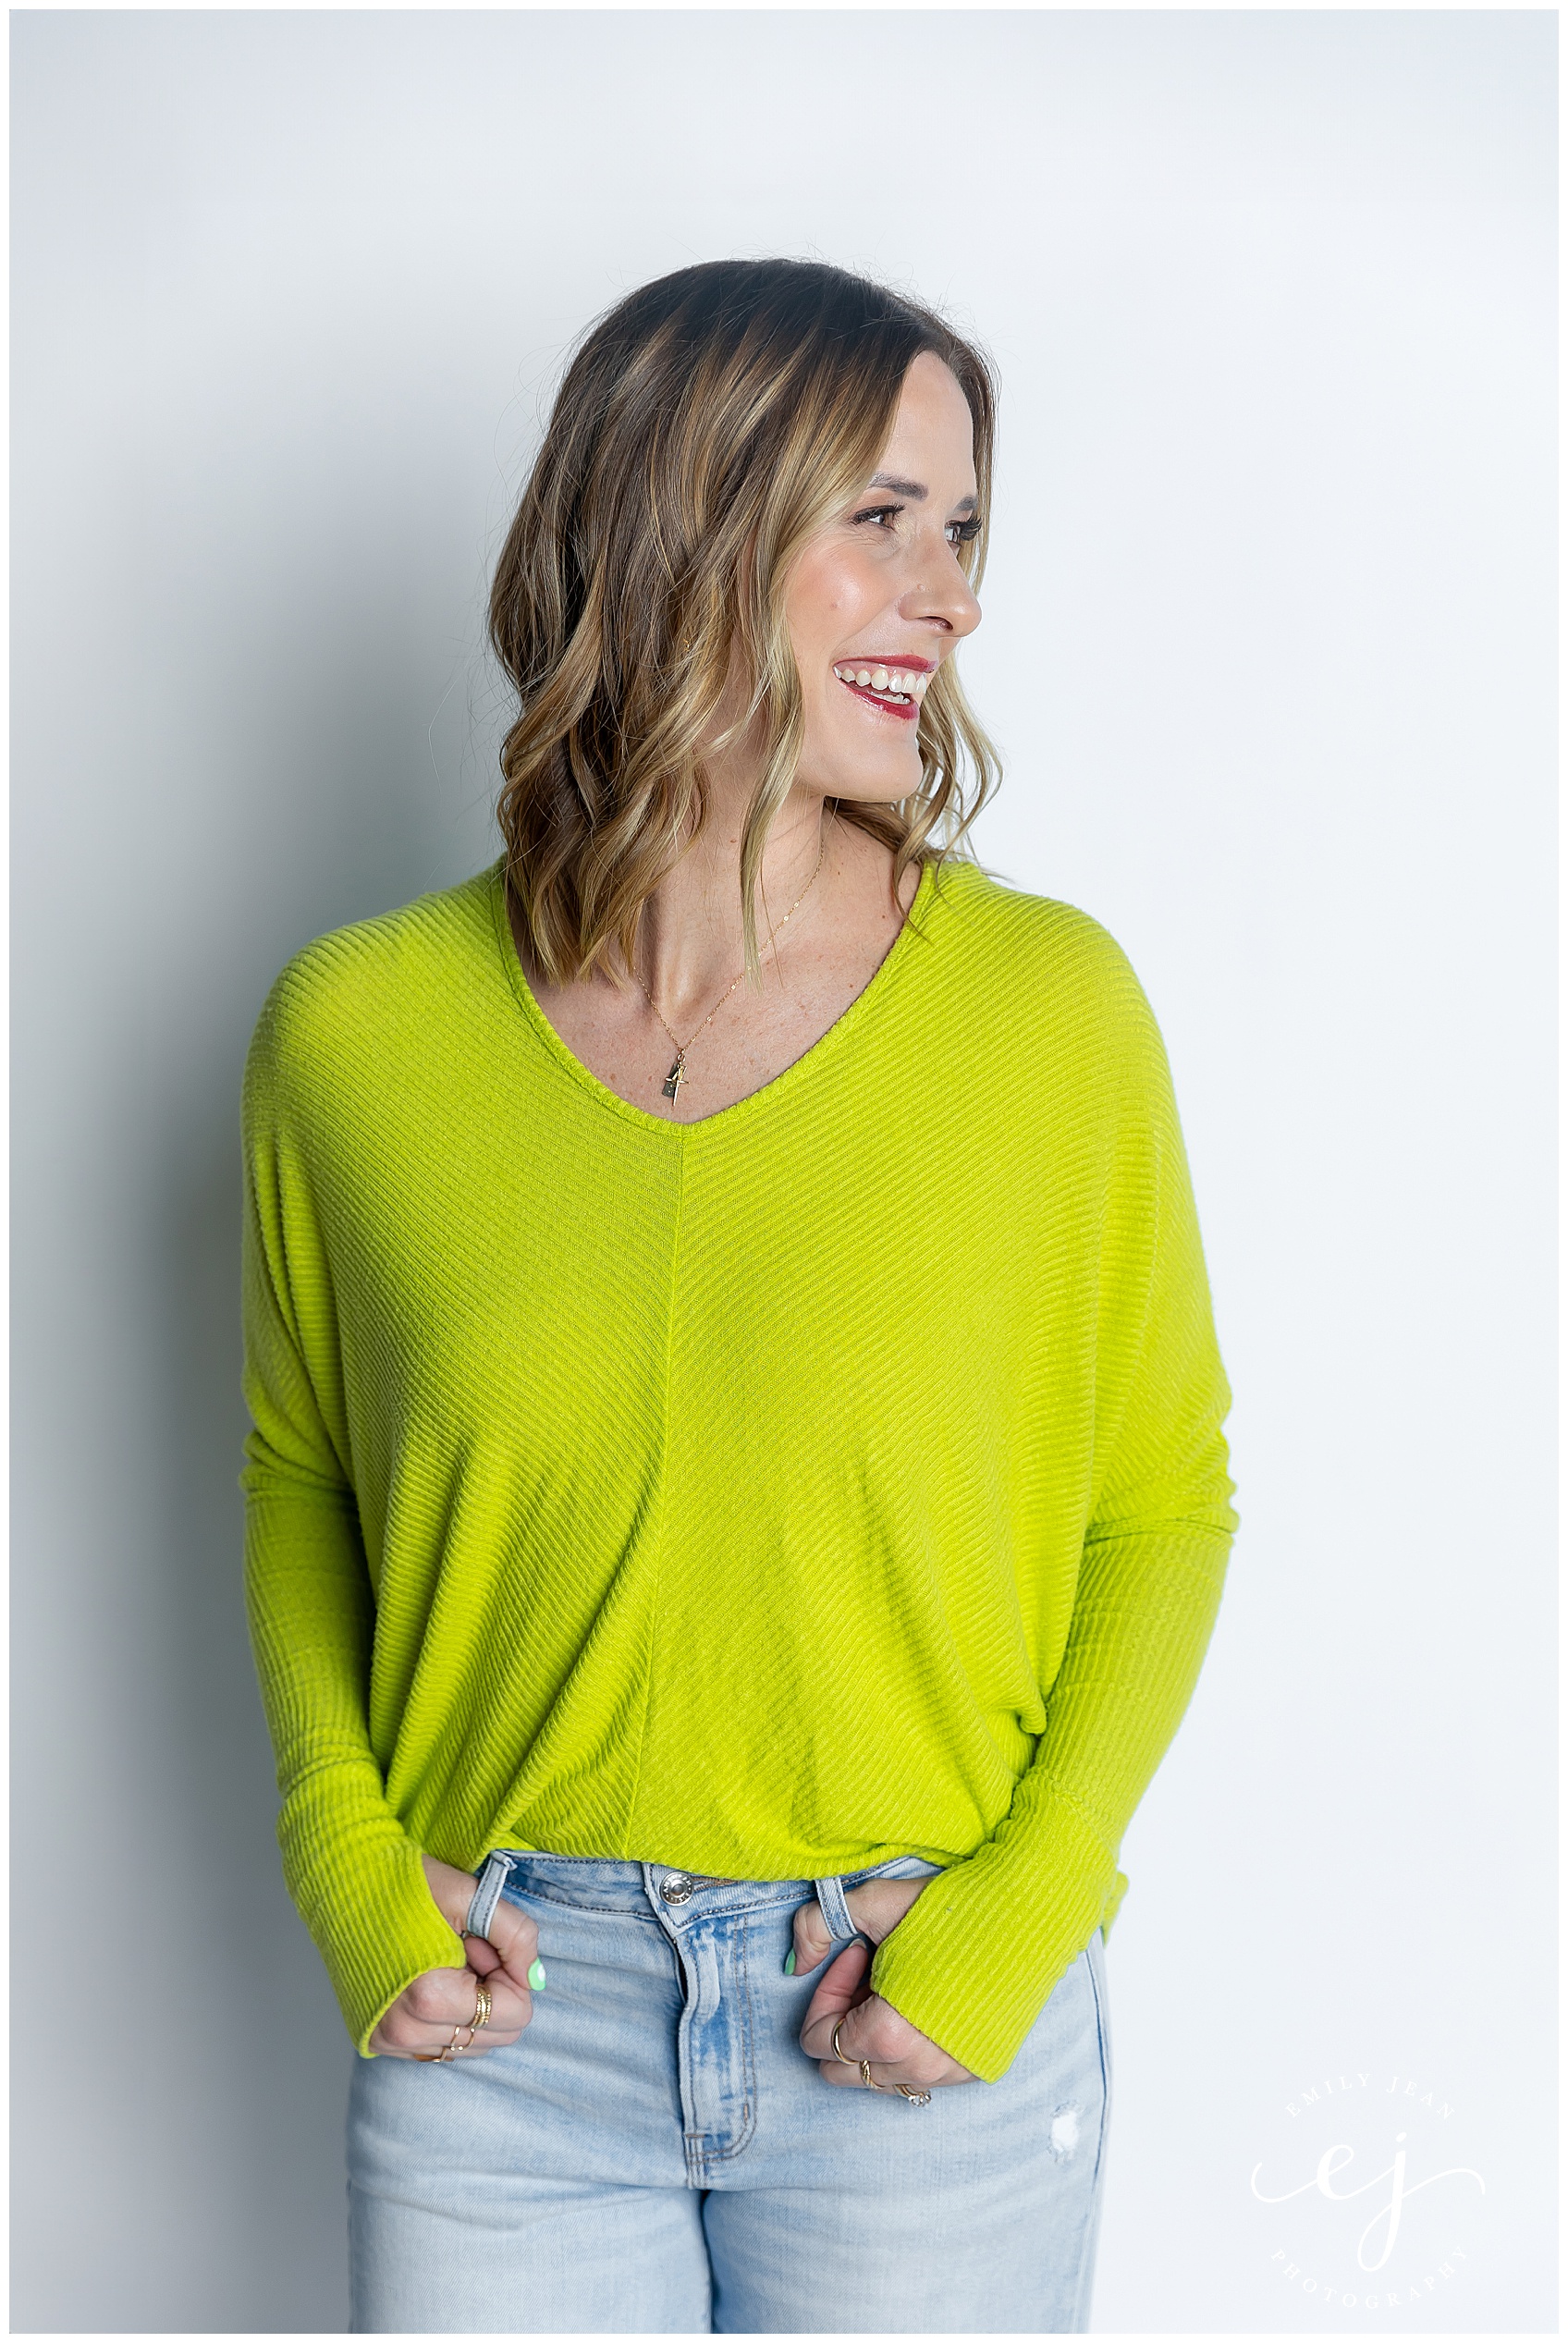 Anna Ledebuhr, coulee boutique models lime, green sweater with blue jeans against a white backdrop